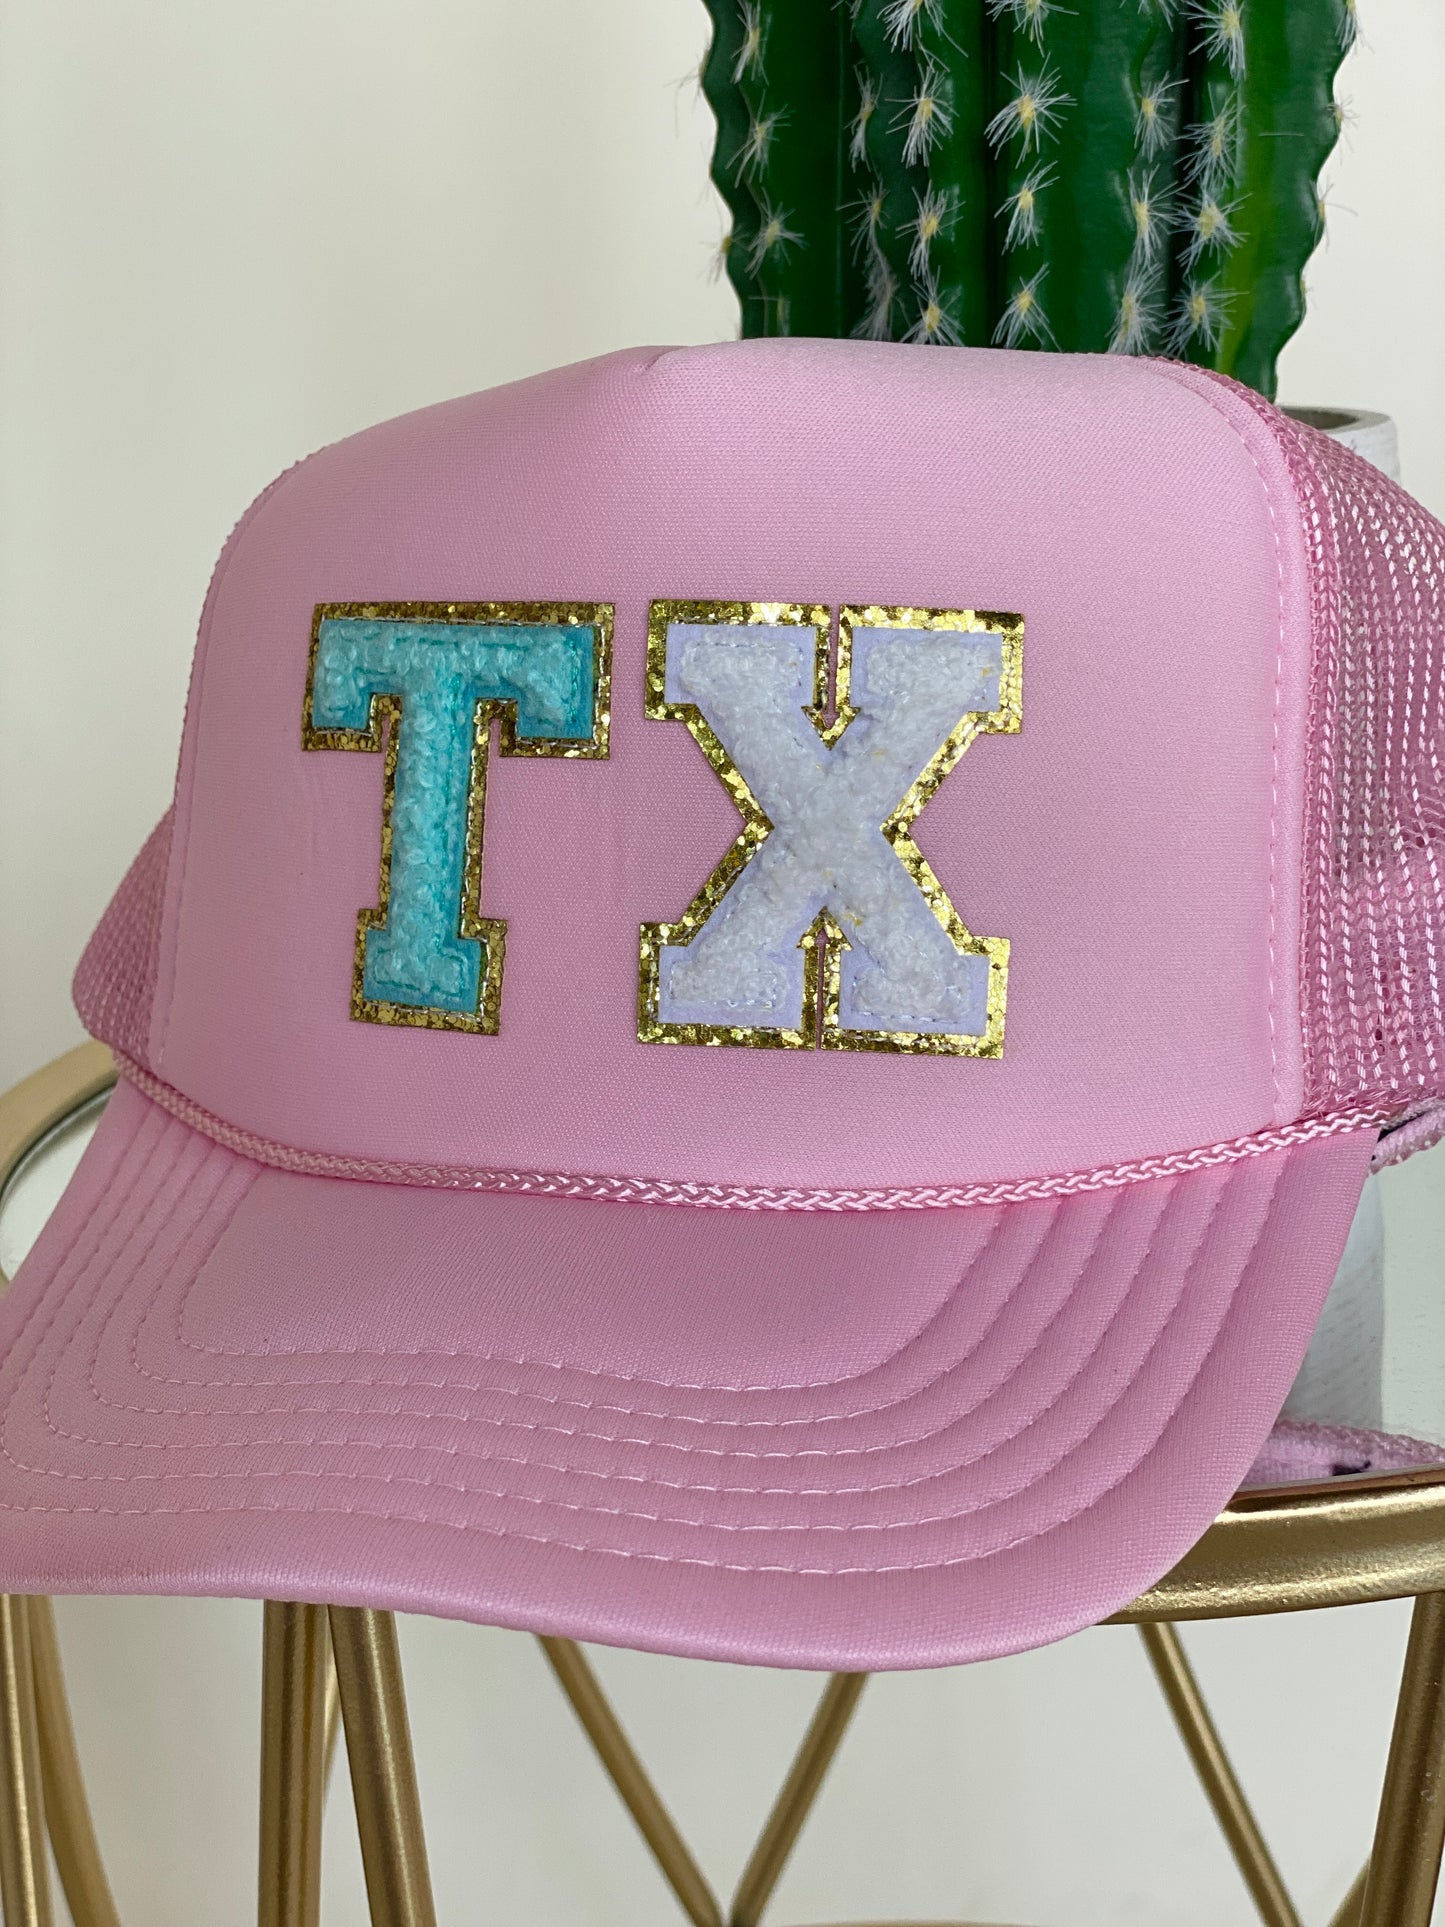 TX Chenille Letters Trucker Hat - Solid Light Pink